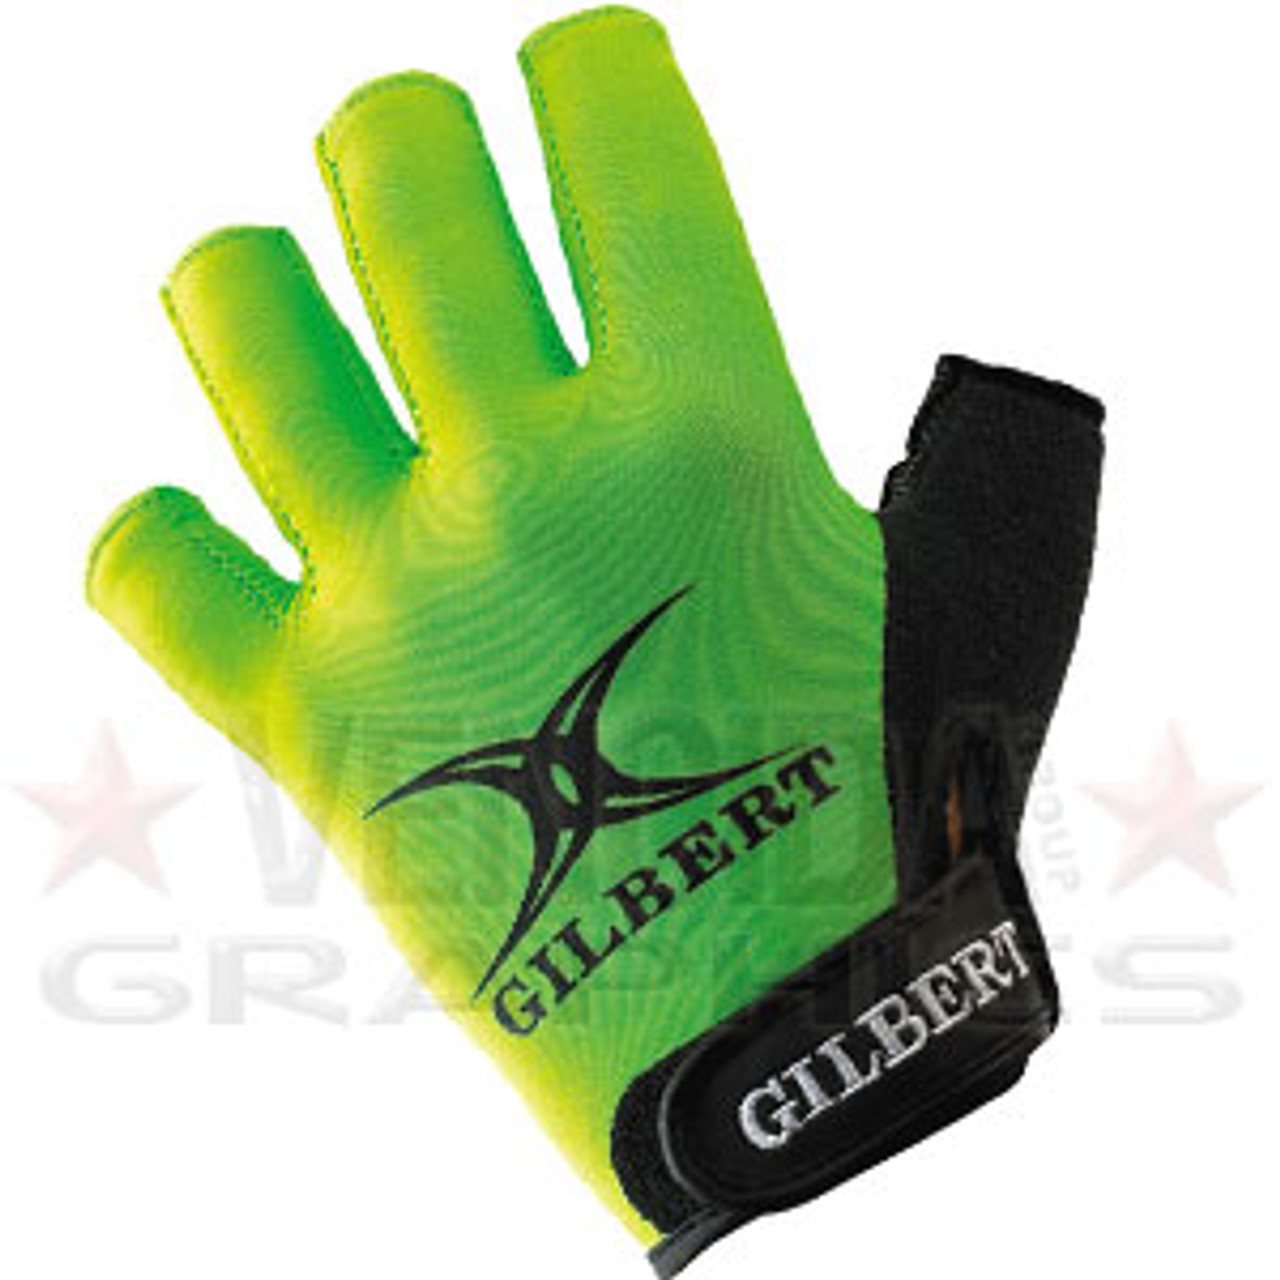 Gants Rugby Mitaines Synergie Gilbert